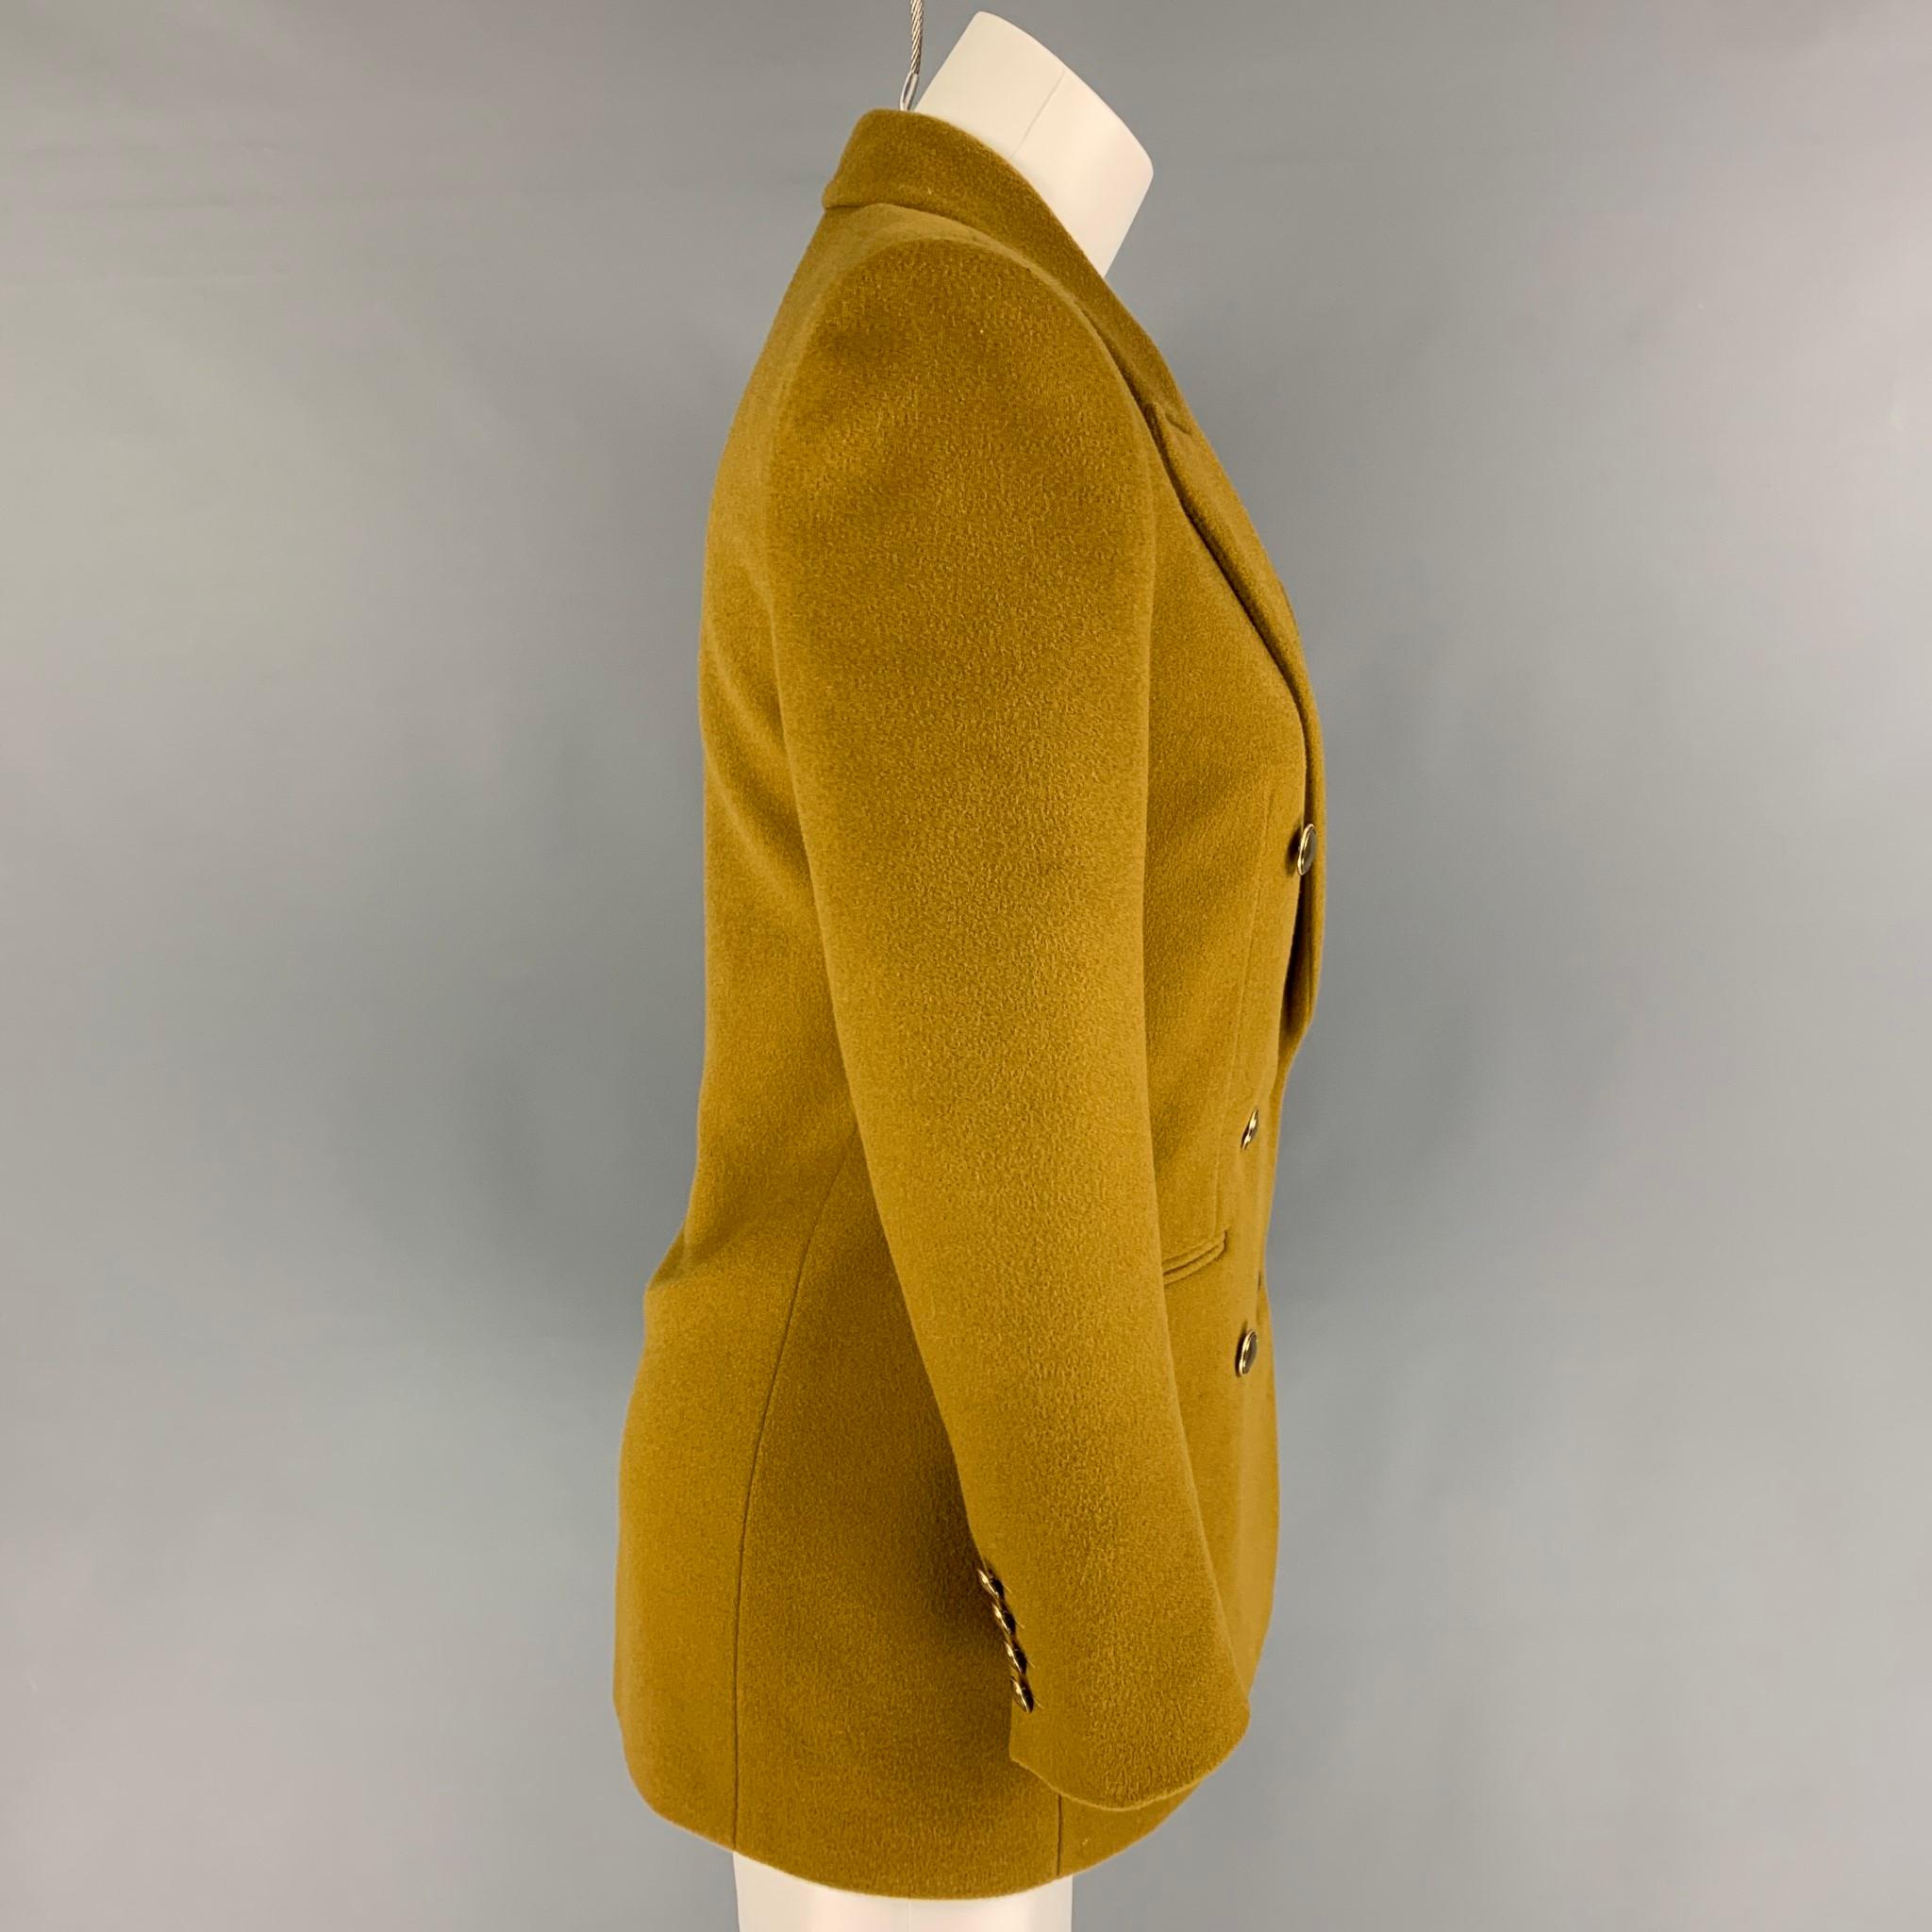 SAINT LAURENT 2020 jacket comes in a mustard wool / cashmere with a silk lining featuring a peak lapel, gold tone button details, slit pockets, and a double breasted closure. Made in Italy. 

Very Good Pre-Owned Condition.
Marked: F36
Original